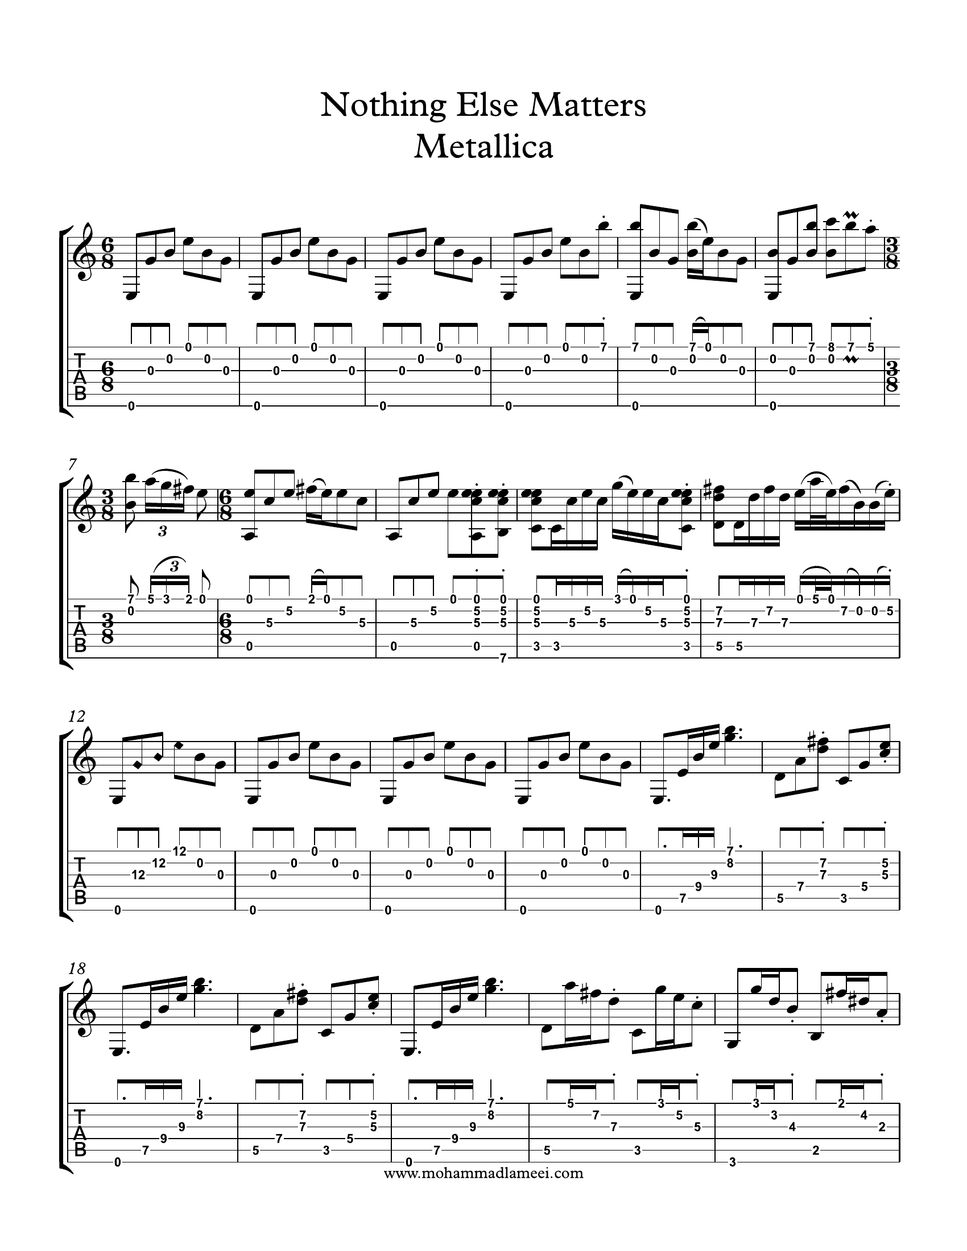 Metallica Nothing Else Matters Tab 1staff By Mohammad Lameei 1581